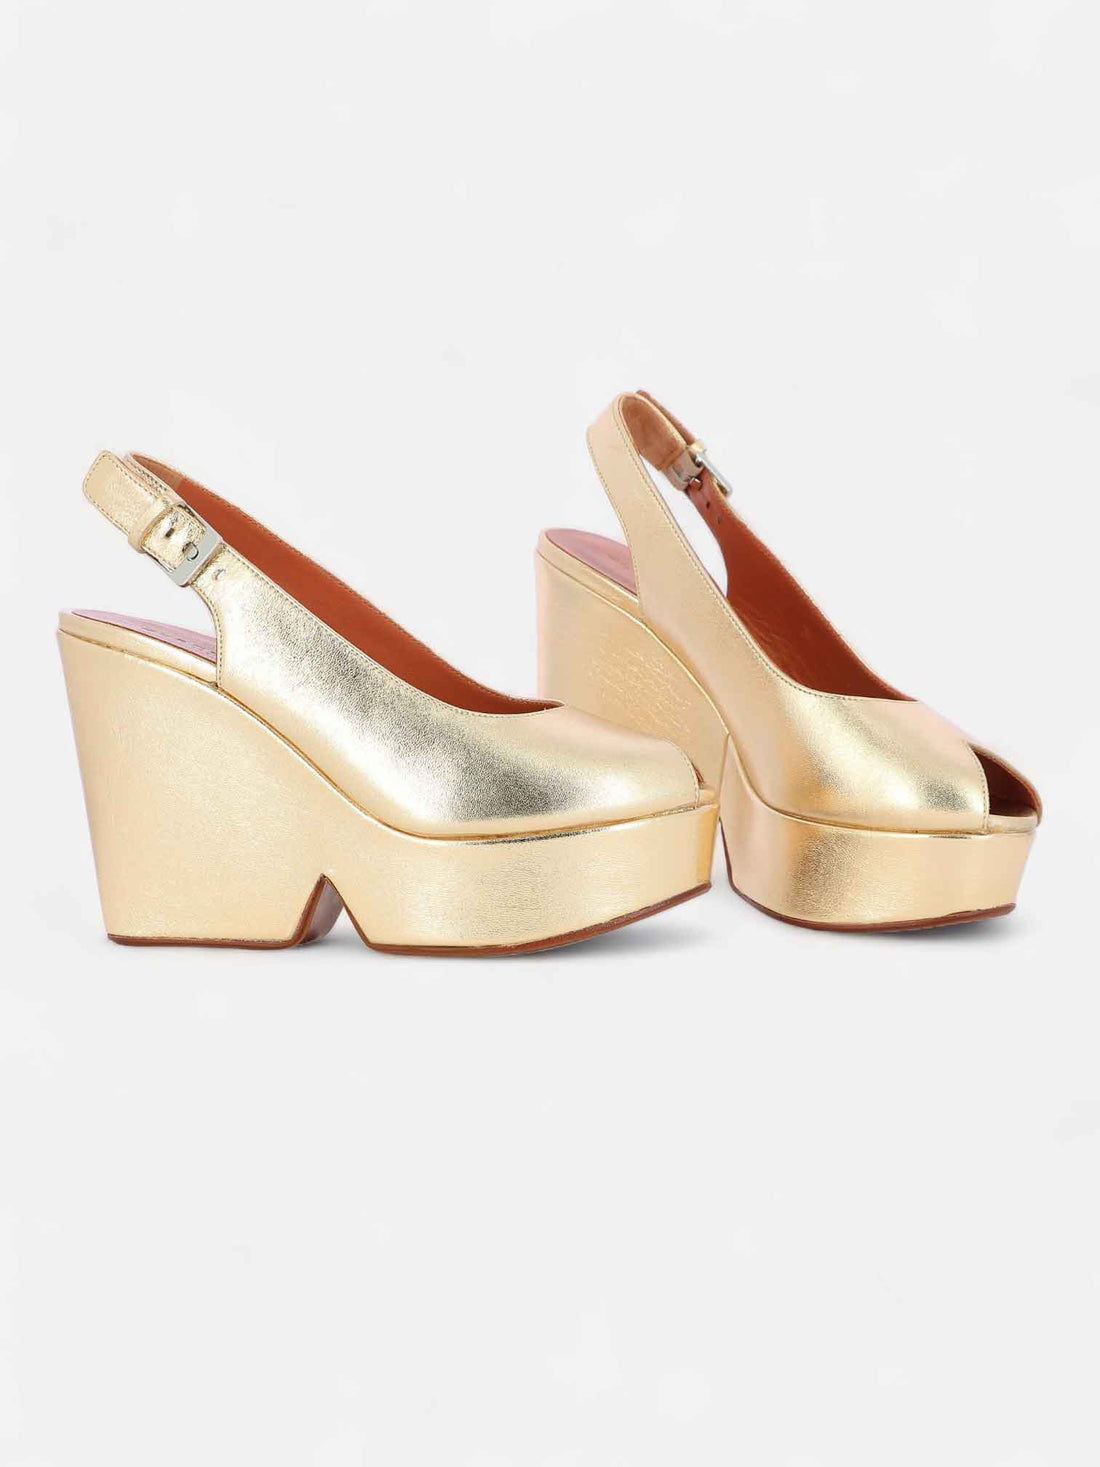 WEDGES - DYLAN wedges, leather gold metallic - 3606063834902 - Clergerie Paris - Europe